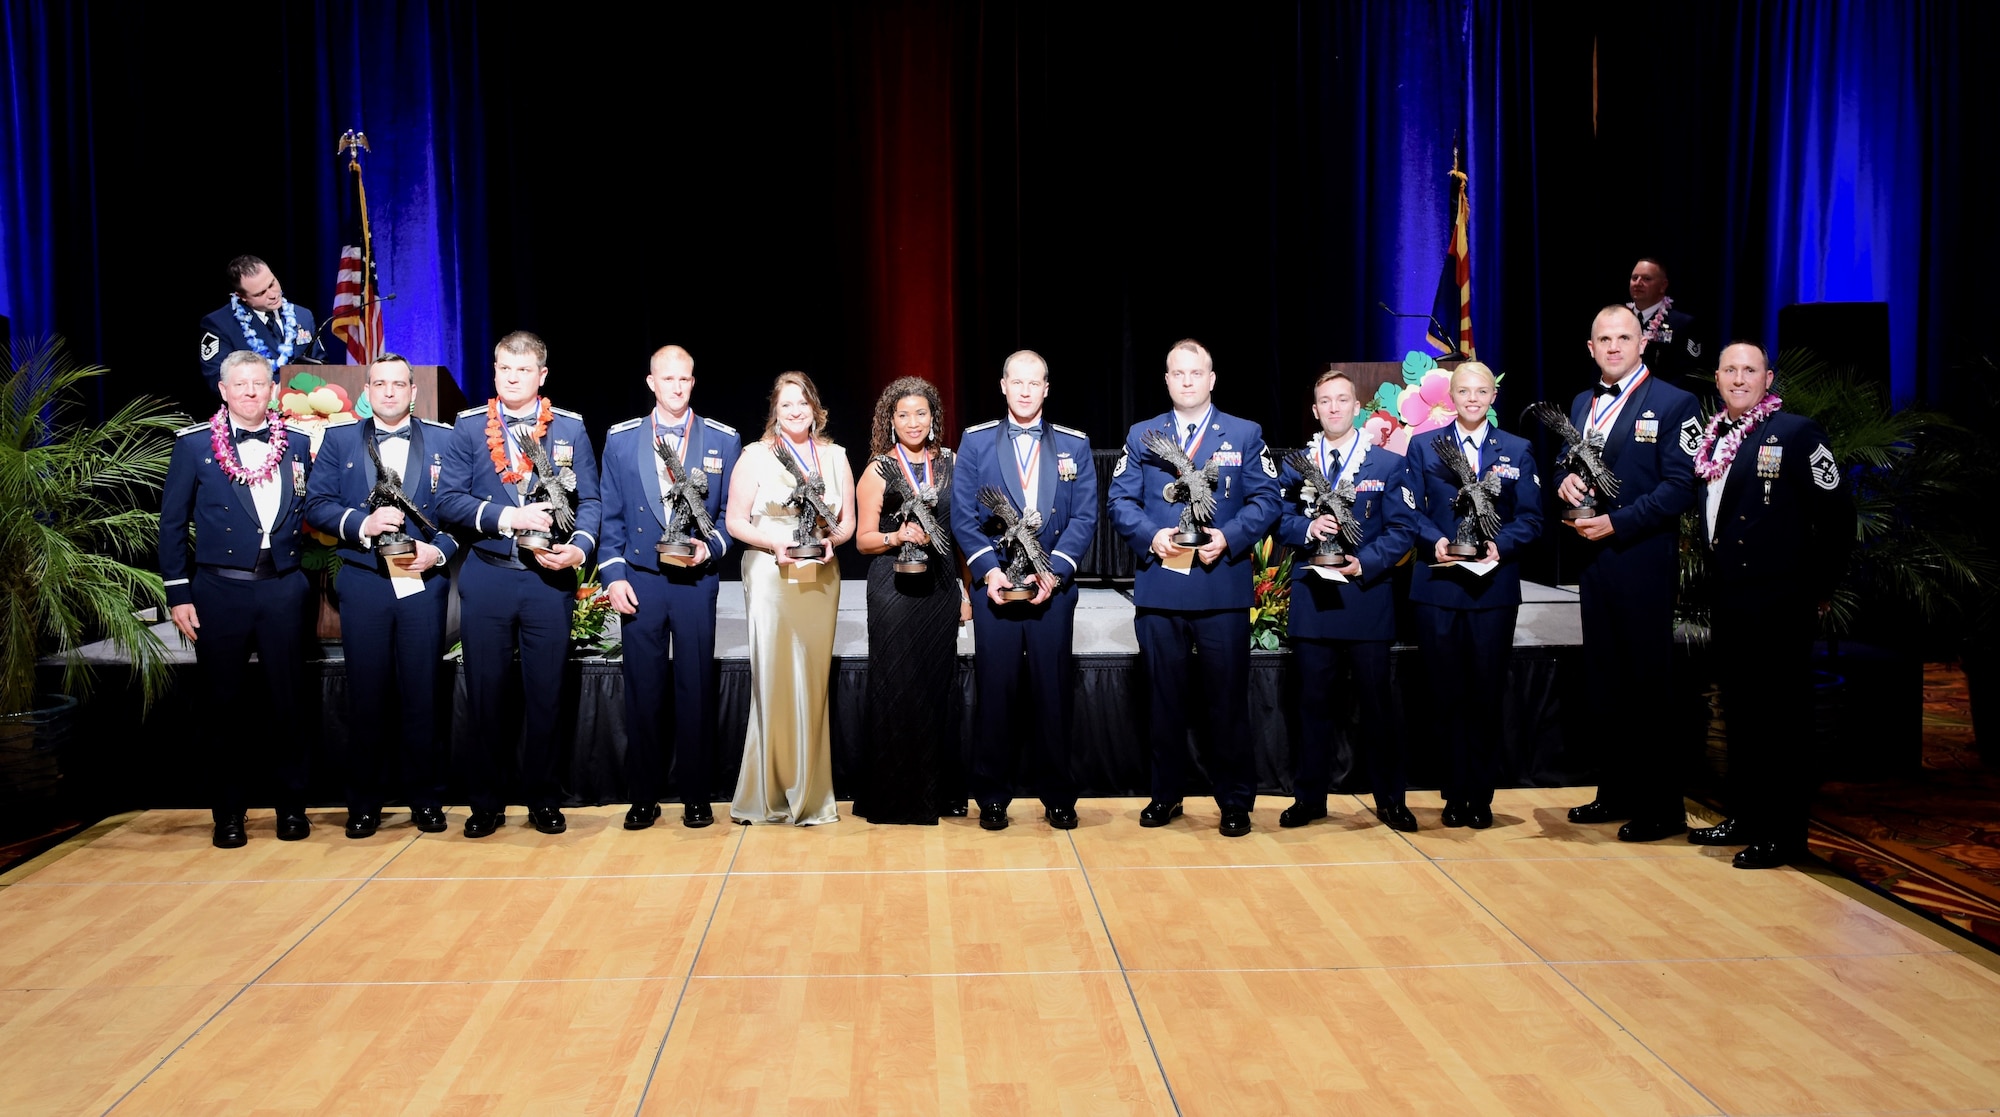 Col. Bryan Cook, 944th Fighter Wing commander and Chief Master Sgt. Jeremy Malcom, 944th FW command chief, stand with the winners of the 944th FW 2018 Annual Award winners Feb. 9, at the Renaissance Hotel, Glendale, Ariz. U.S. Air Force photo by Staff Sgt. Christopher Moore)